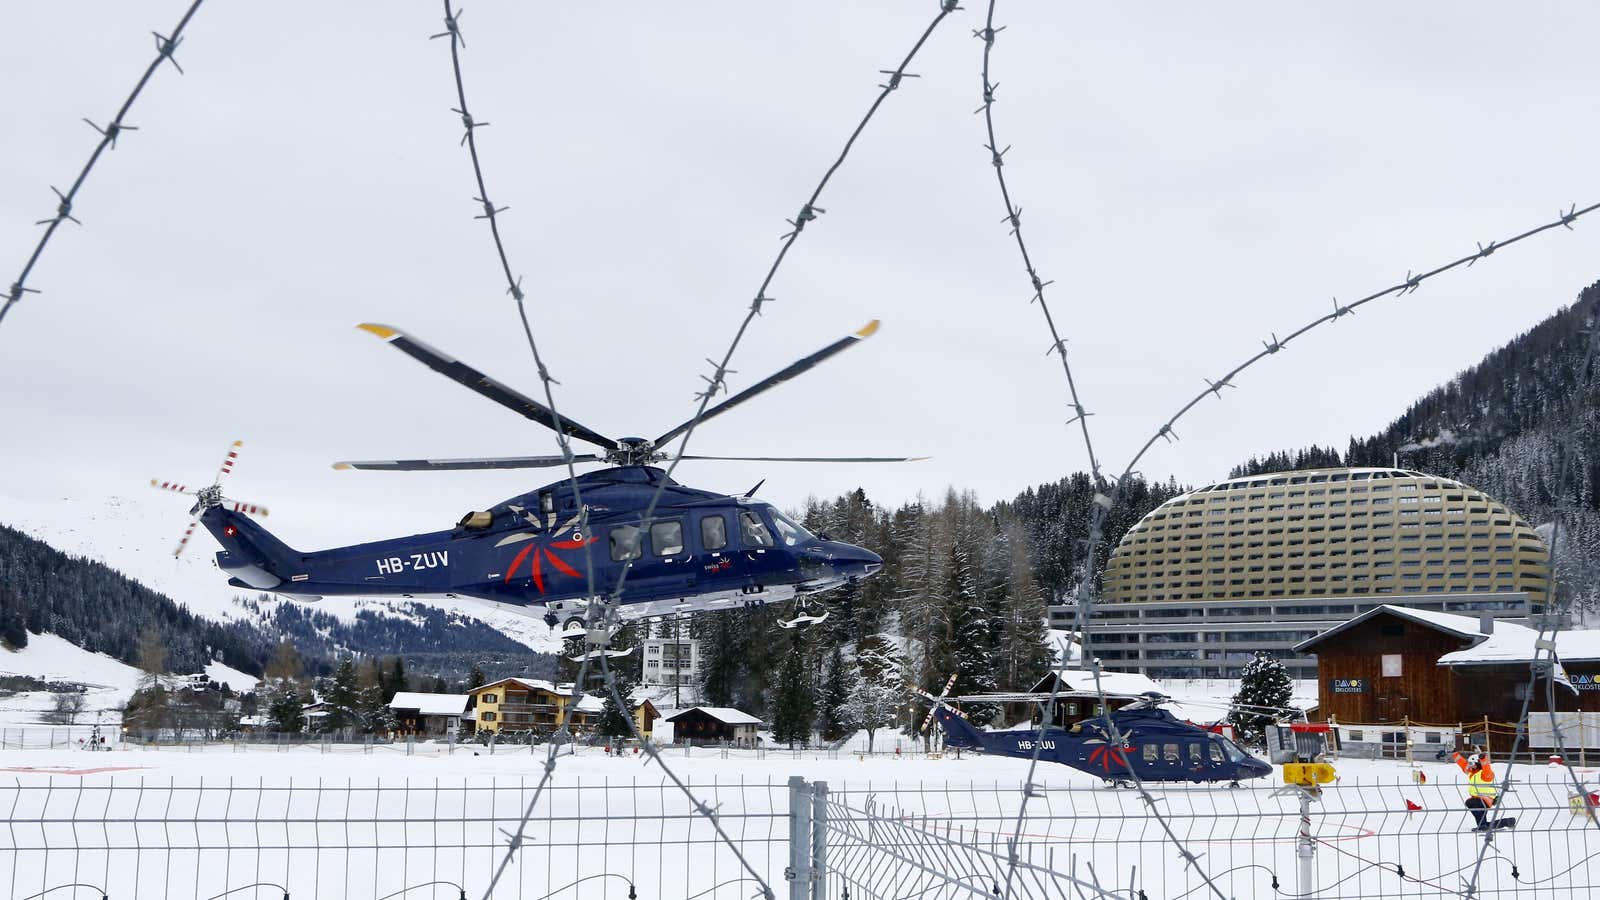 Arriving in style at Davos.